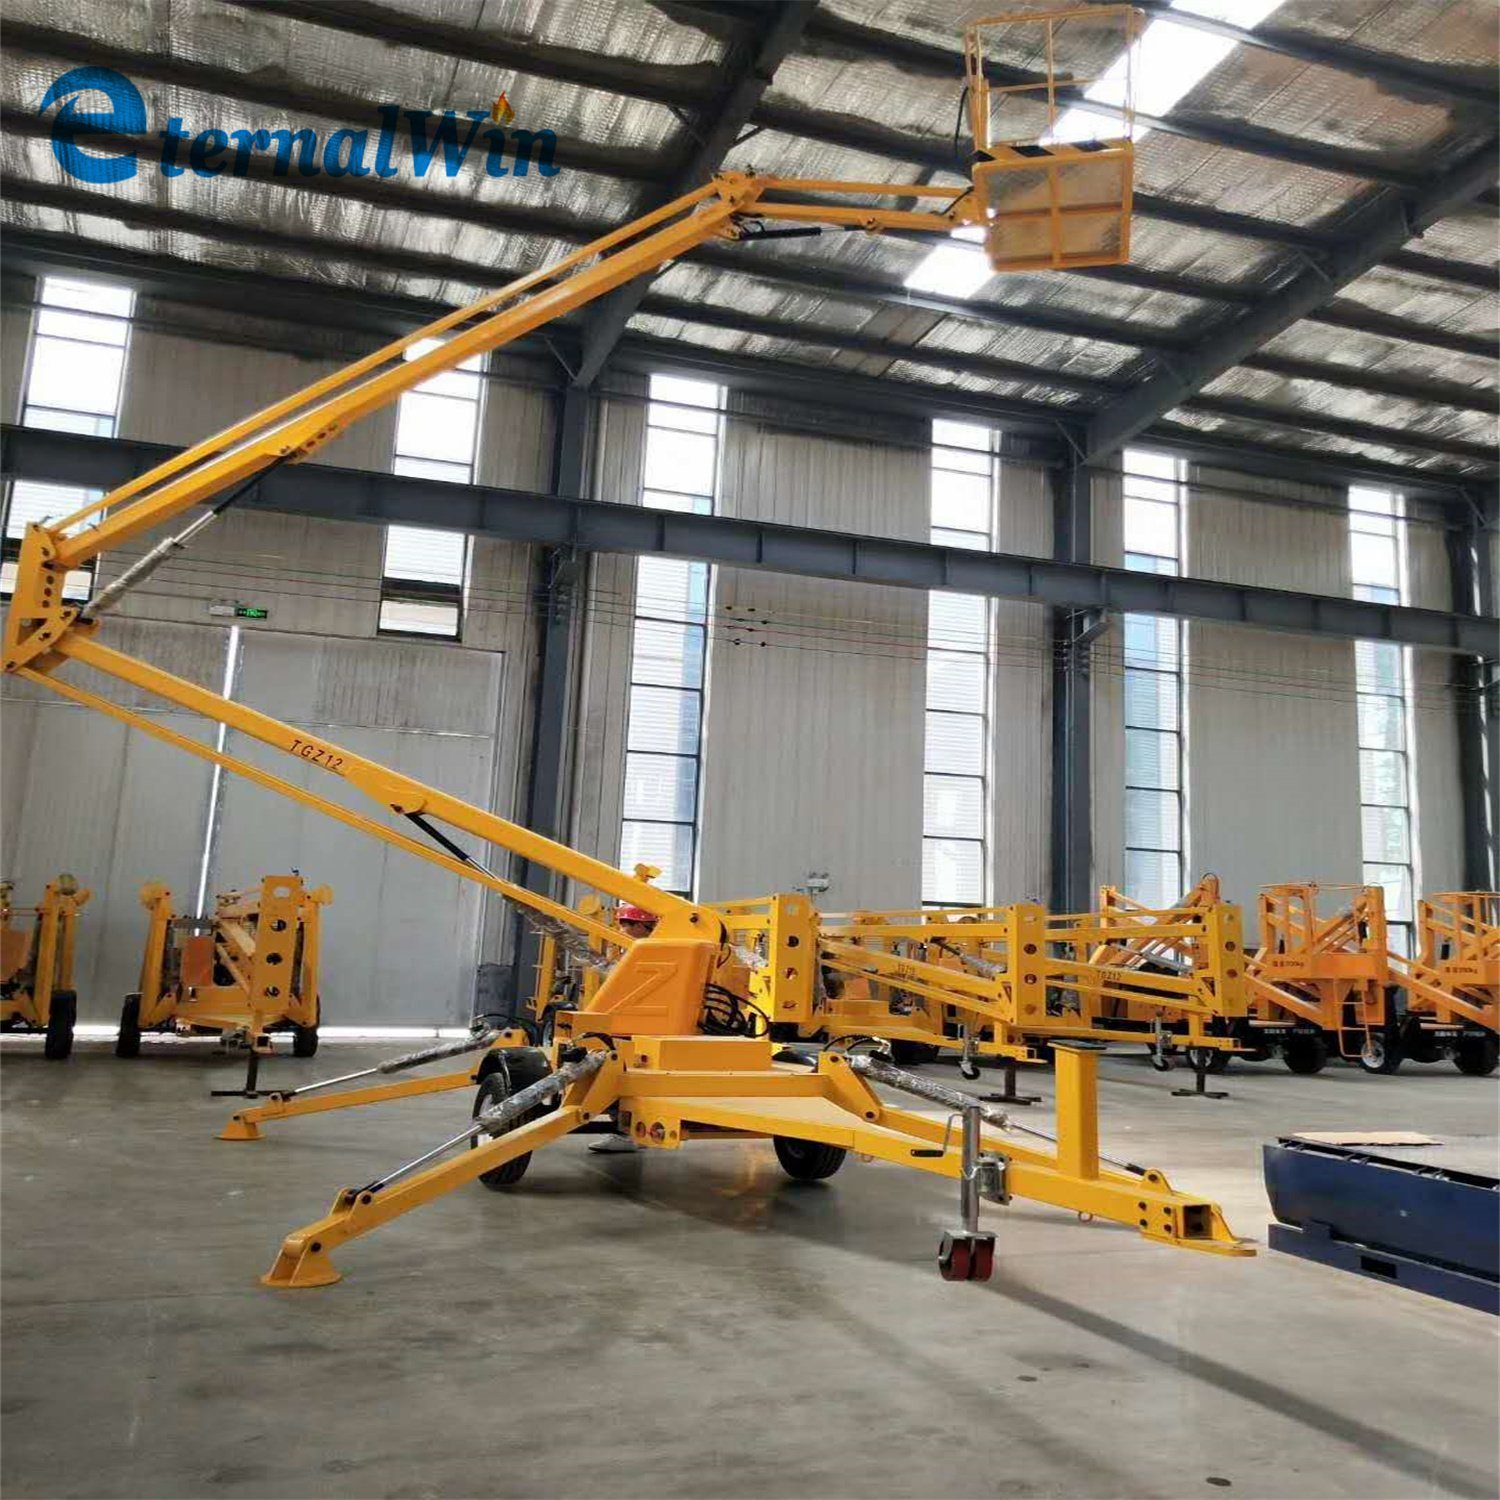 Towable Hydraulic Telescoping Self-Propelled Articulated Boom Lift Trailer Spider Lifts Price